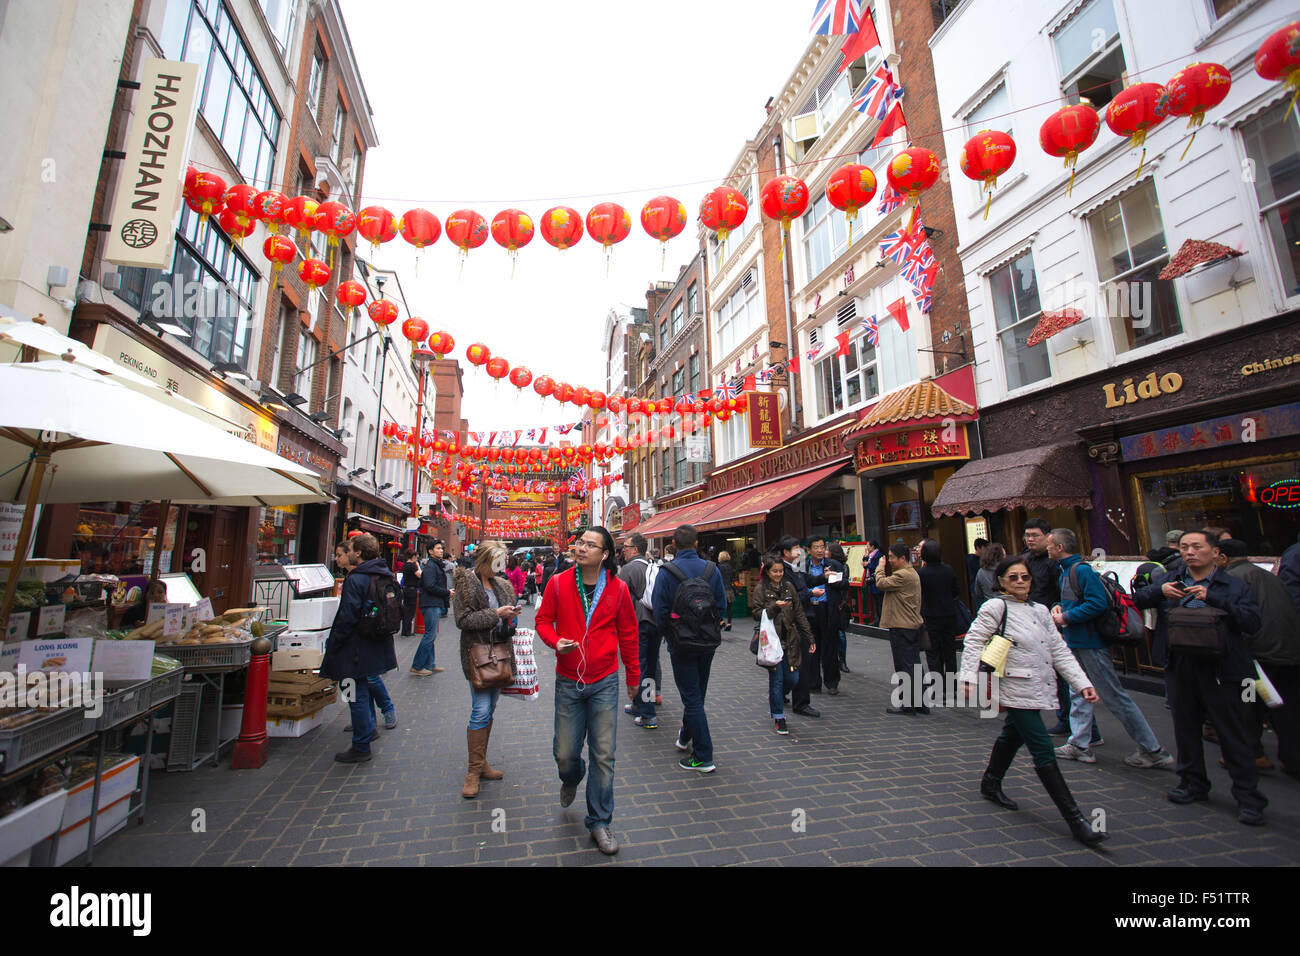 China Town, Gerrard Street, West End, Londres, Angleterre, RU Banque D'Images